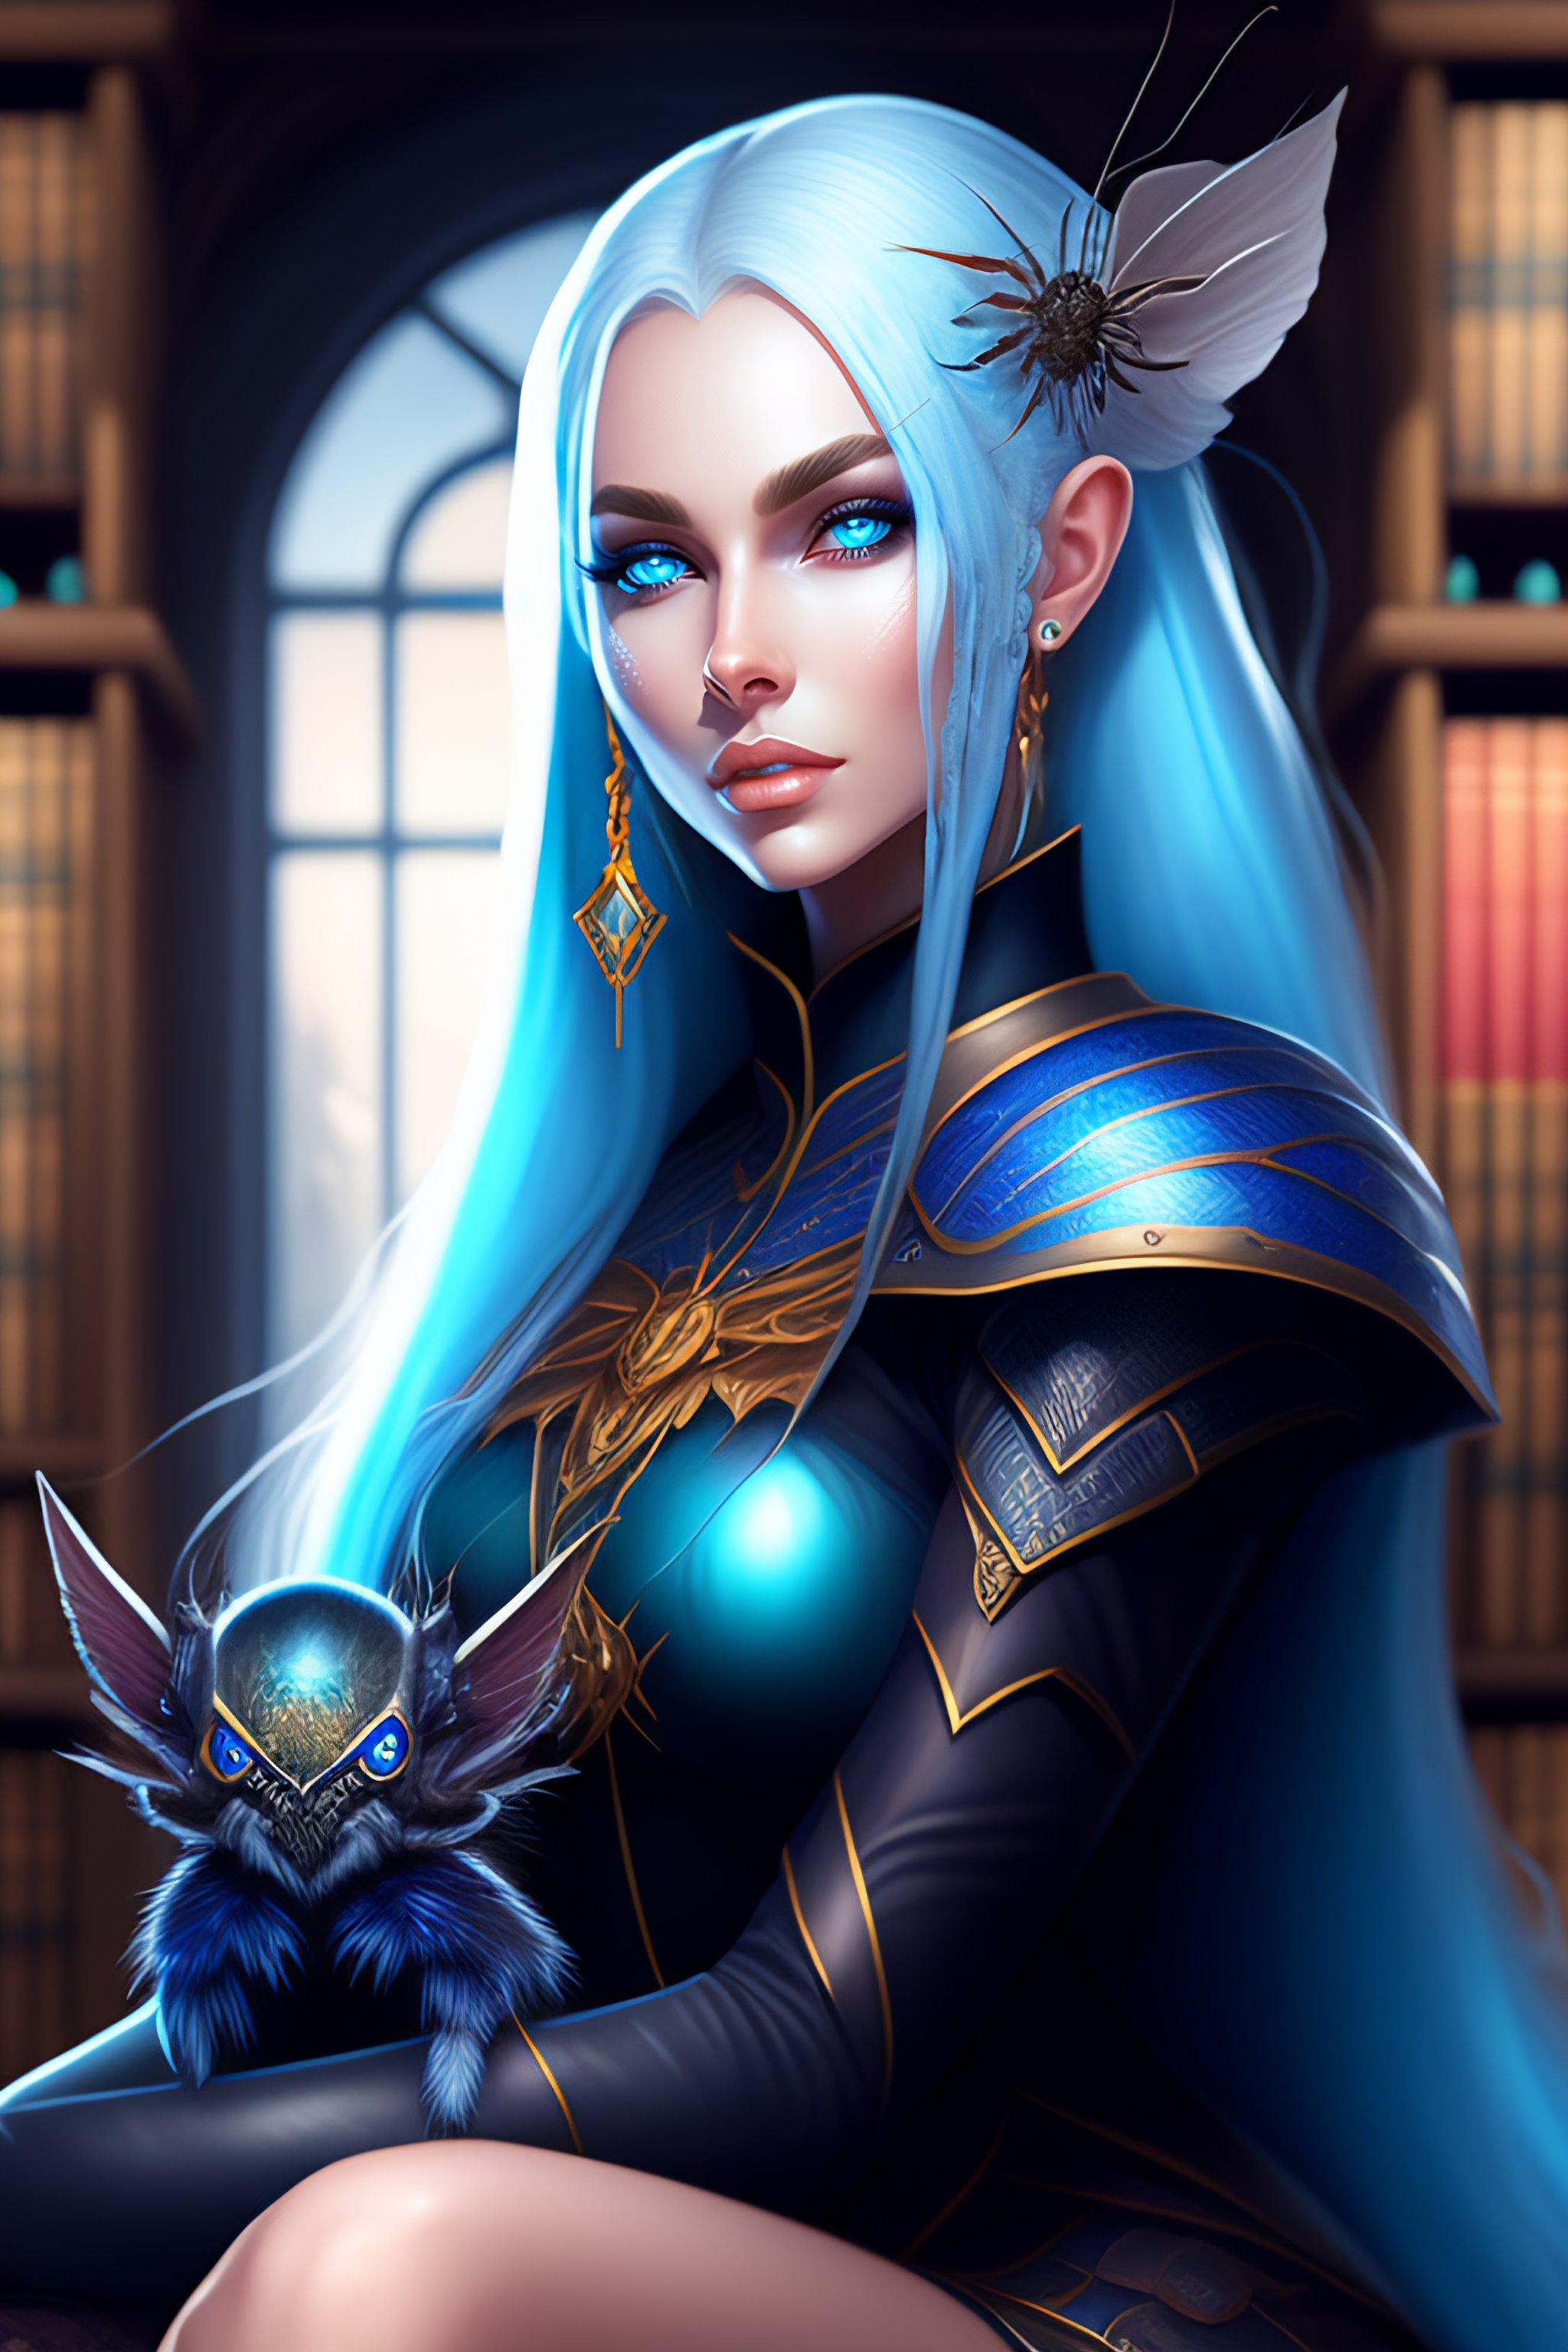 Lexica A Dark Elf Girl With Pale Blue Eyes Sitting In A Library And Holding A Spider Extreme 